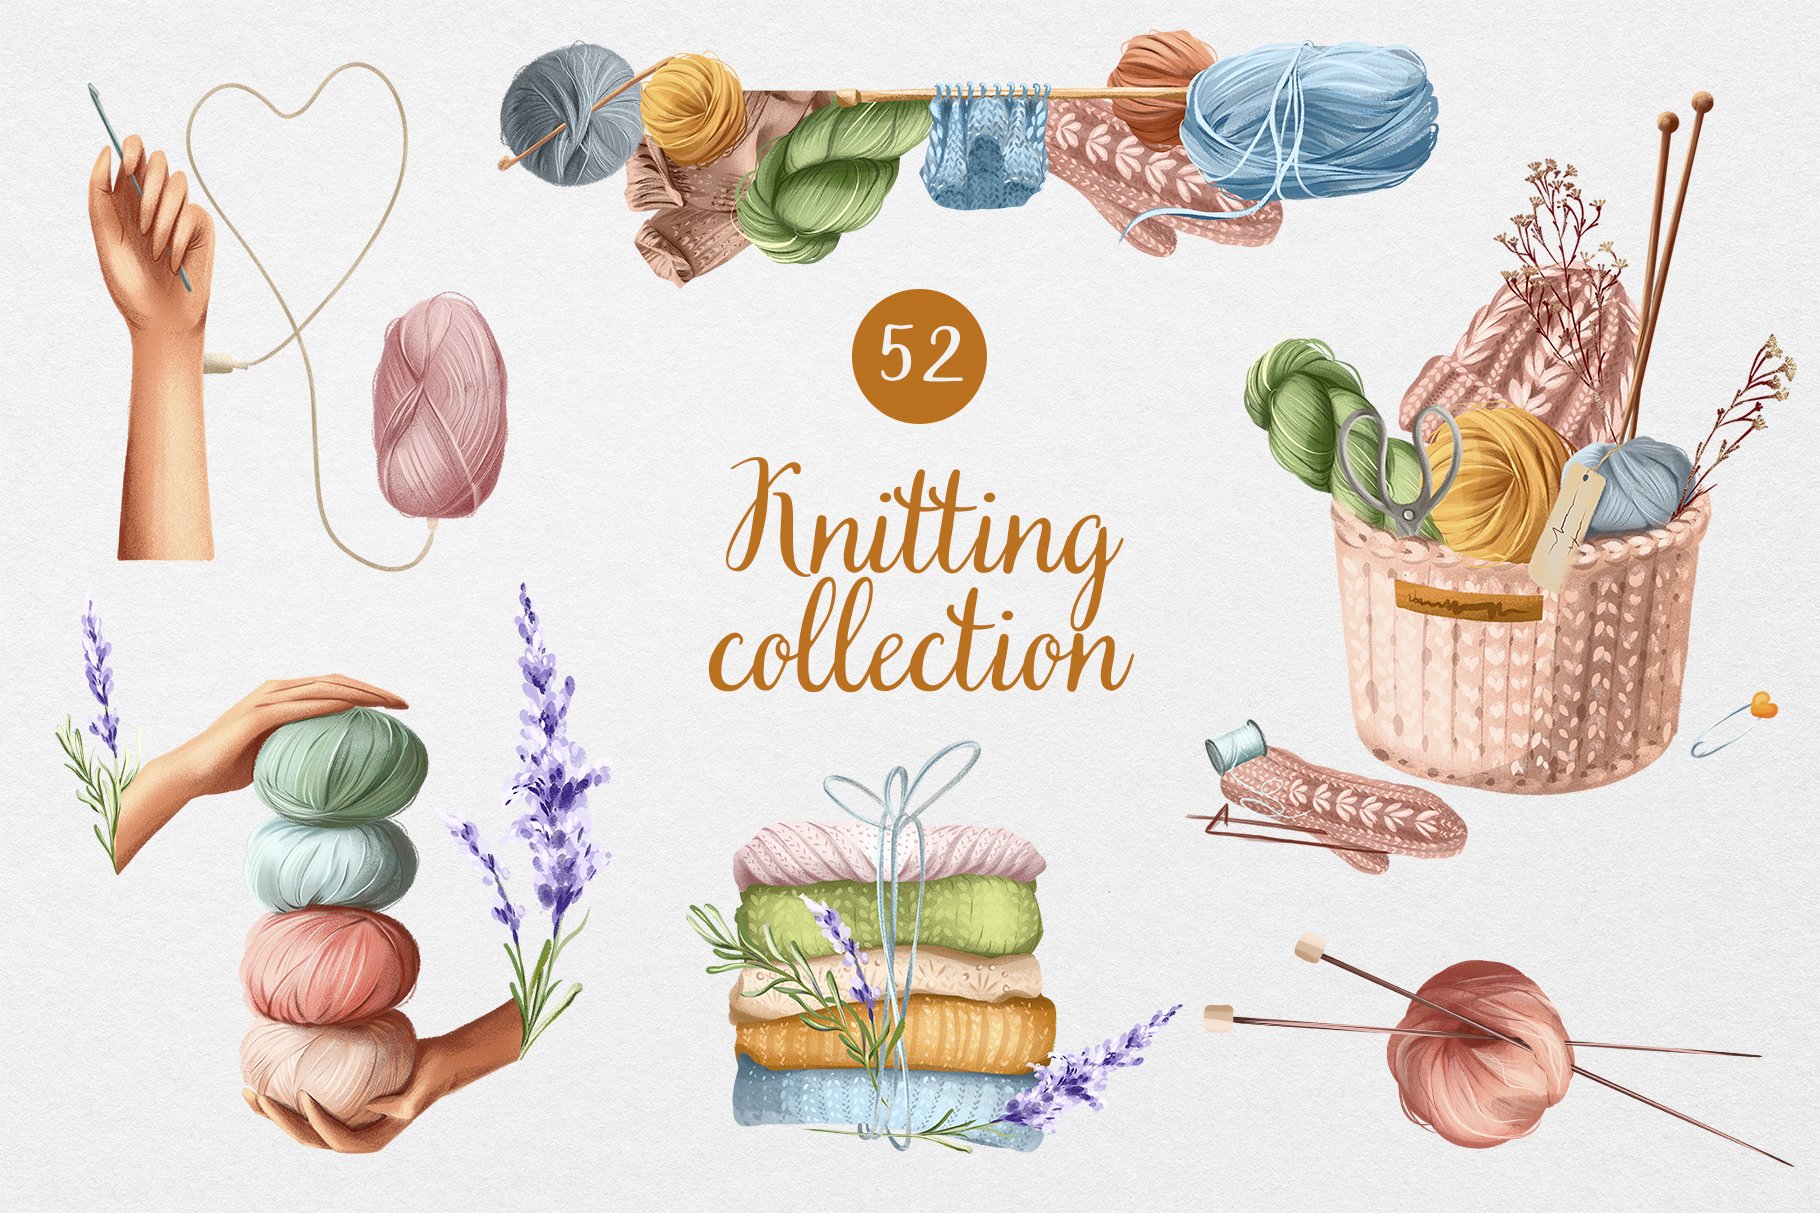 Watercolor knitting collections cover image.